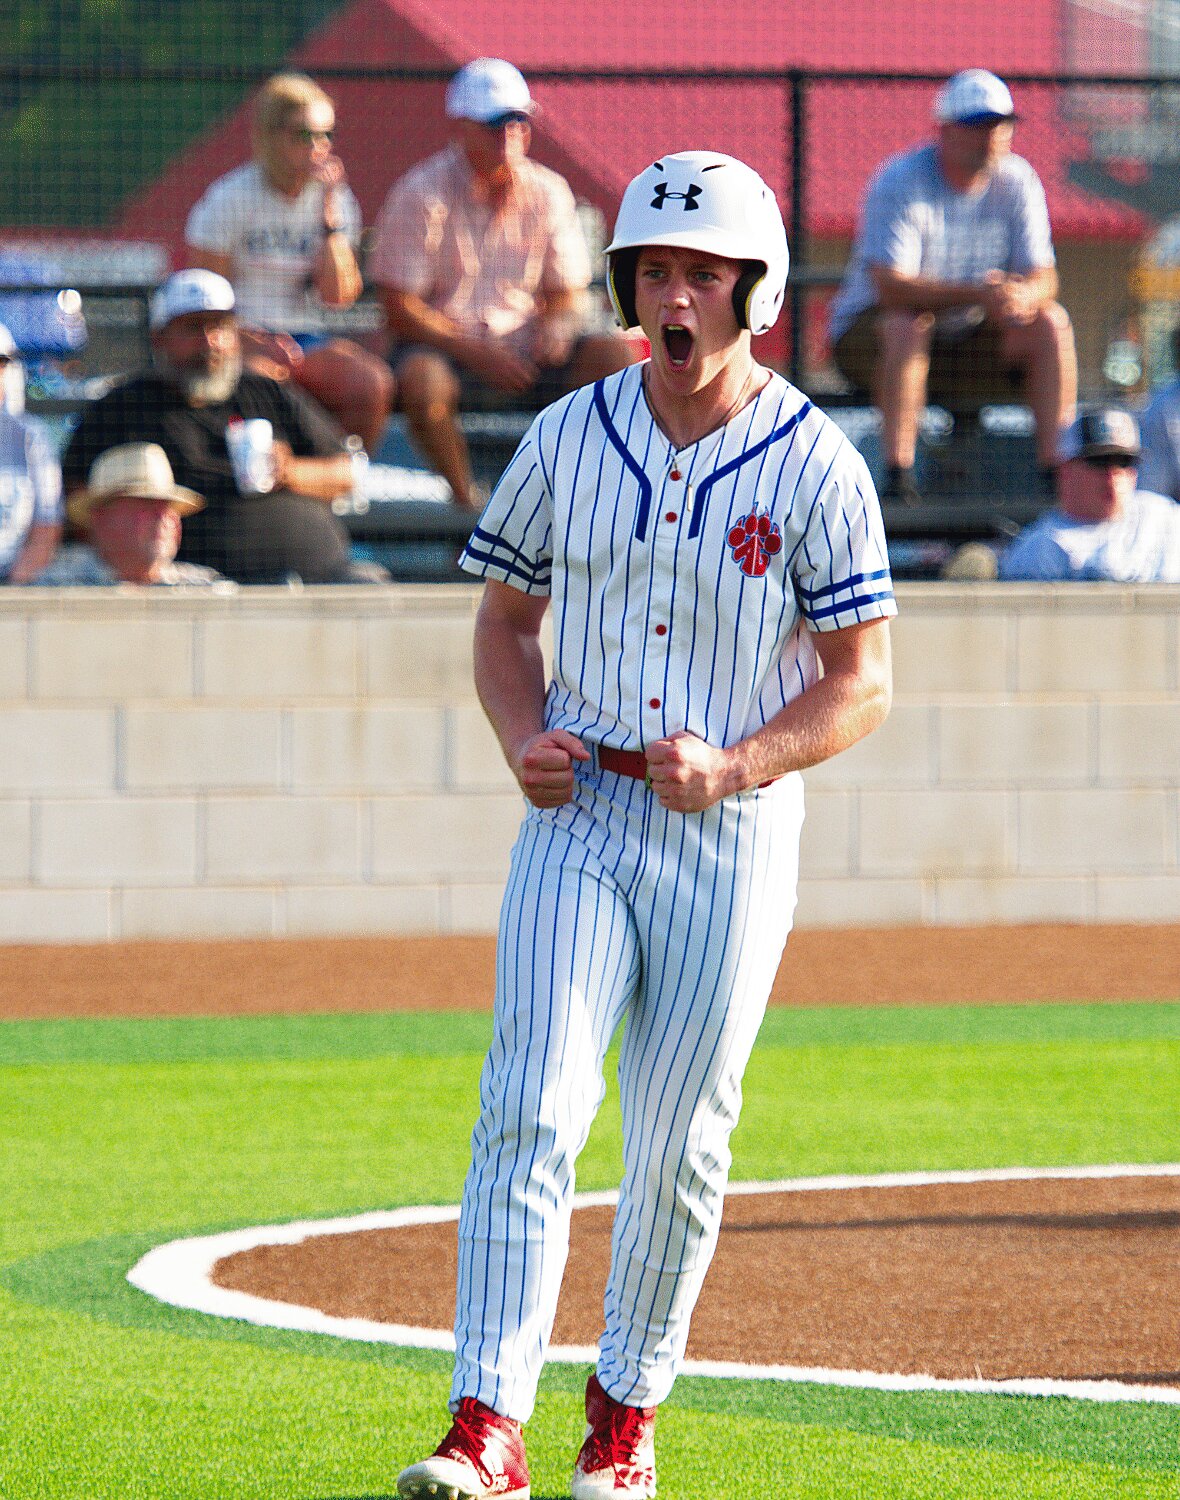 Glen Hartley celebrates scoring the first run of the game after getting on with a lead-off triple. [buy panther baseball pictures]